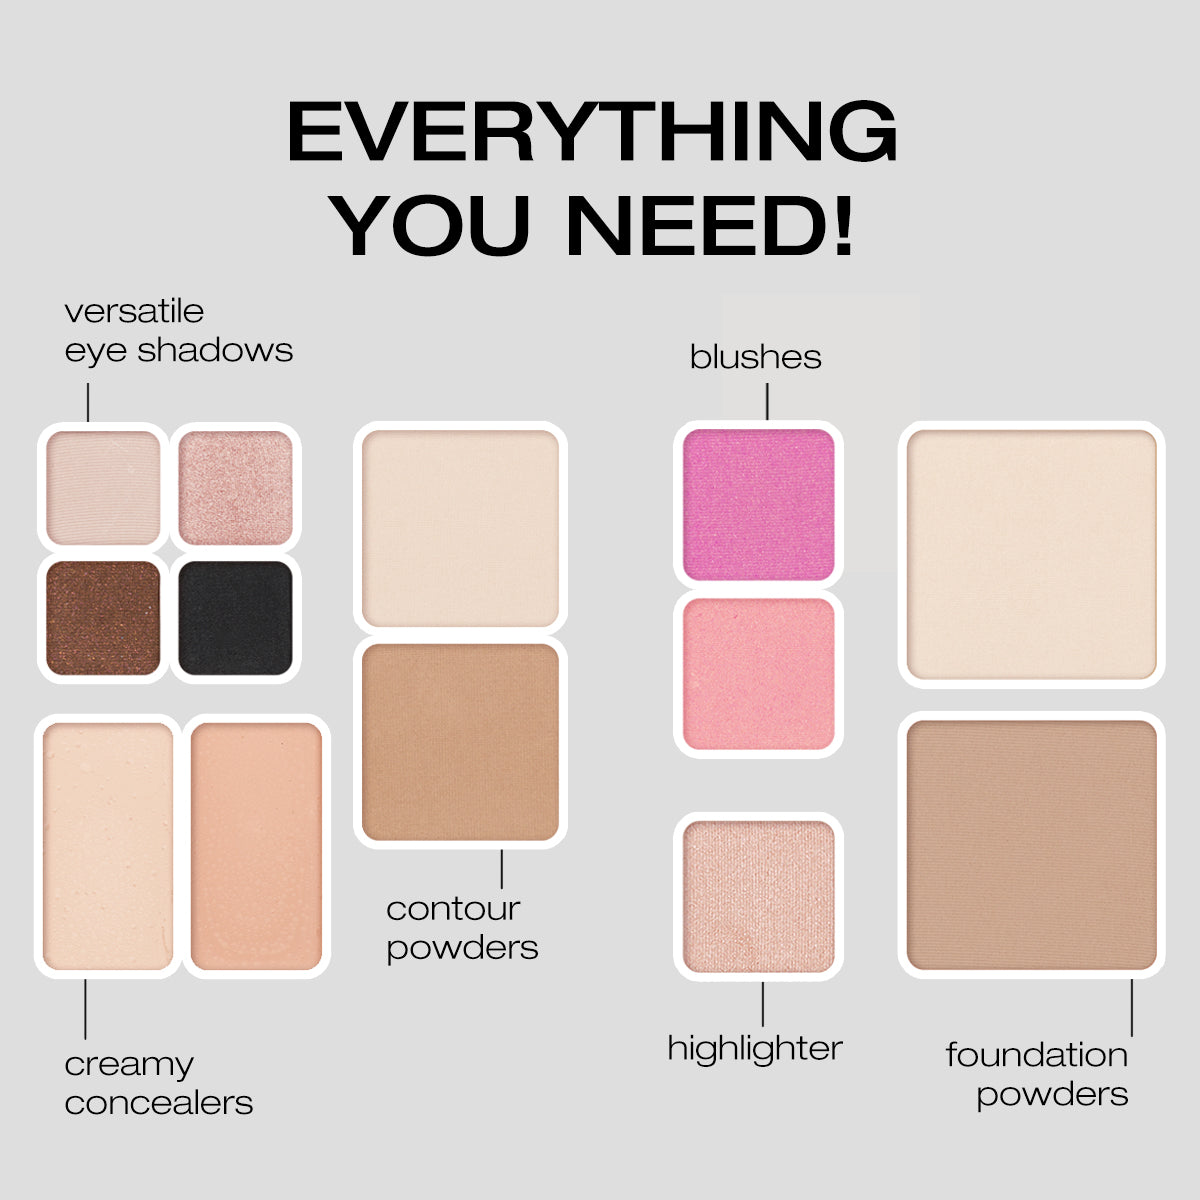 a diagram showing the positions of the 13 cosmetics that are in a Fold Out Face makeup palette, including a quad of 4 eye shadow, 2 cream concealers, 2 contour powders, 2 blushes, 2 foundation powders and 1 shimmering highlighter powder, all curated for a very fair skin tone #1 light